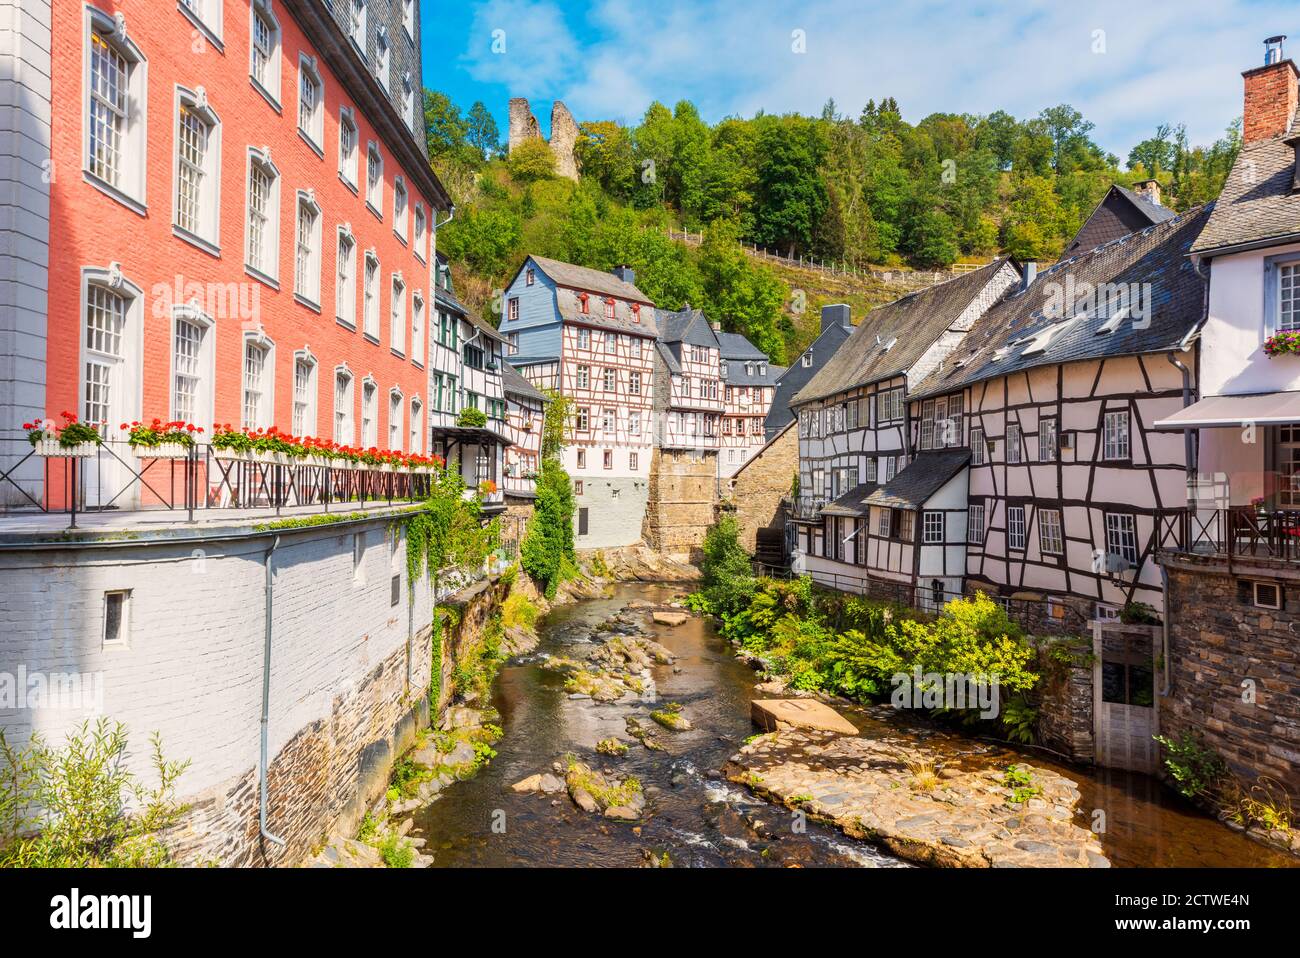 Half-timbered houses along the Ruhr river in Monschau, a small town in the Eifel region of western Germany Stock Photo